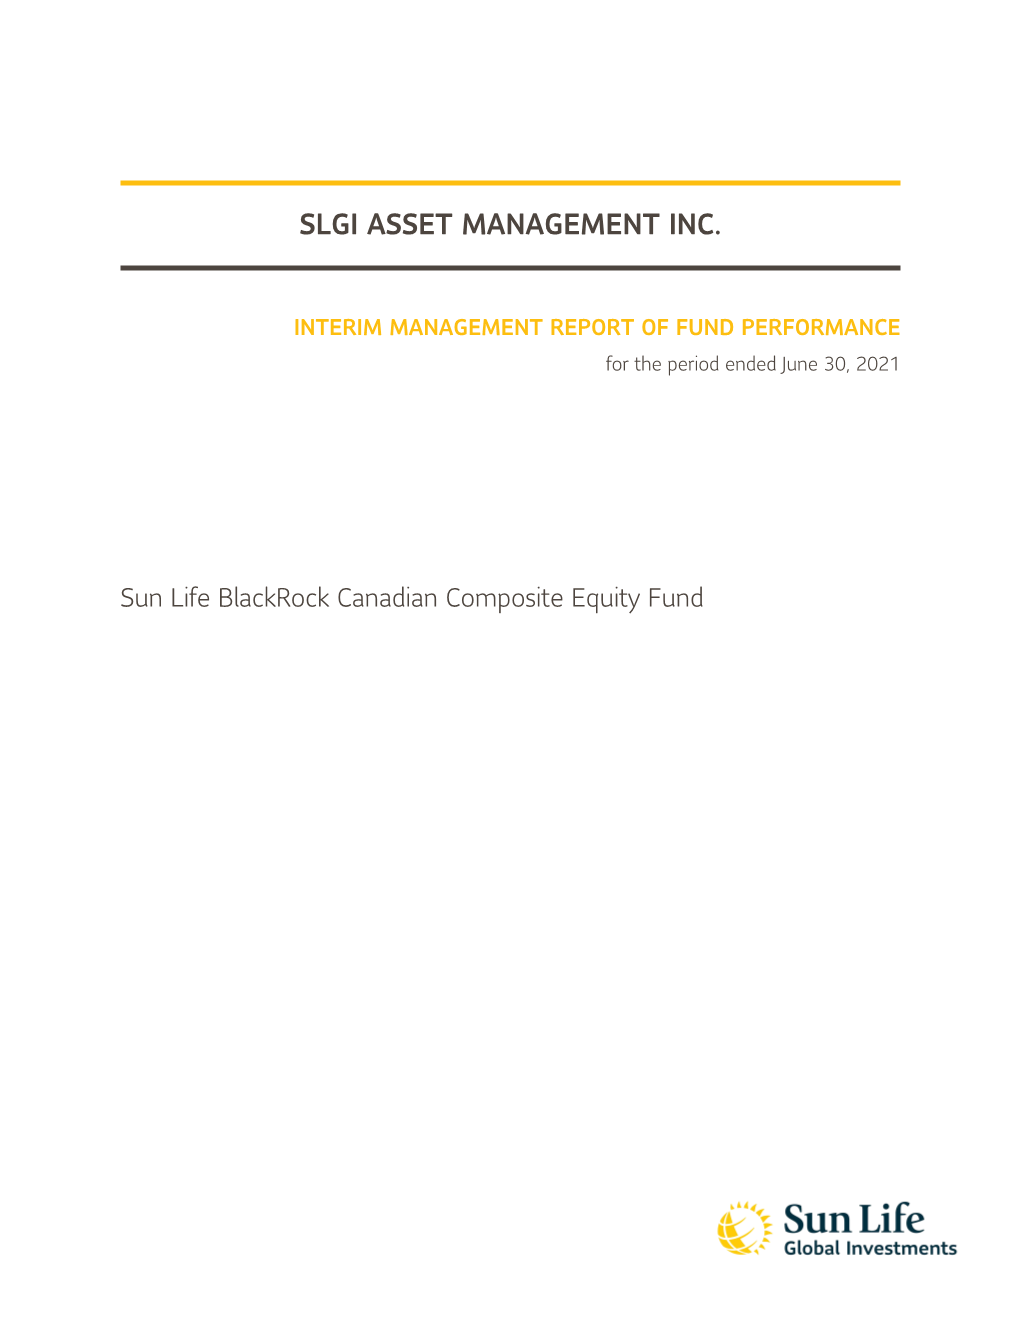 Sun Life Blackrock Canadian Composite Equity Fund This Page Is Intentionally Left Blank Sun Life Blackrock Canadian Composite Equity Fund